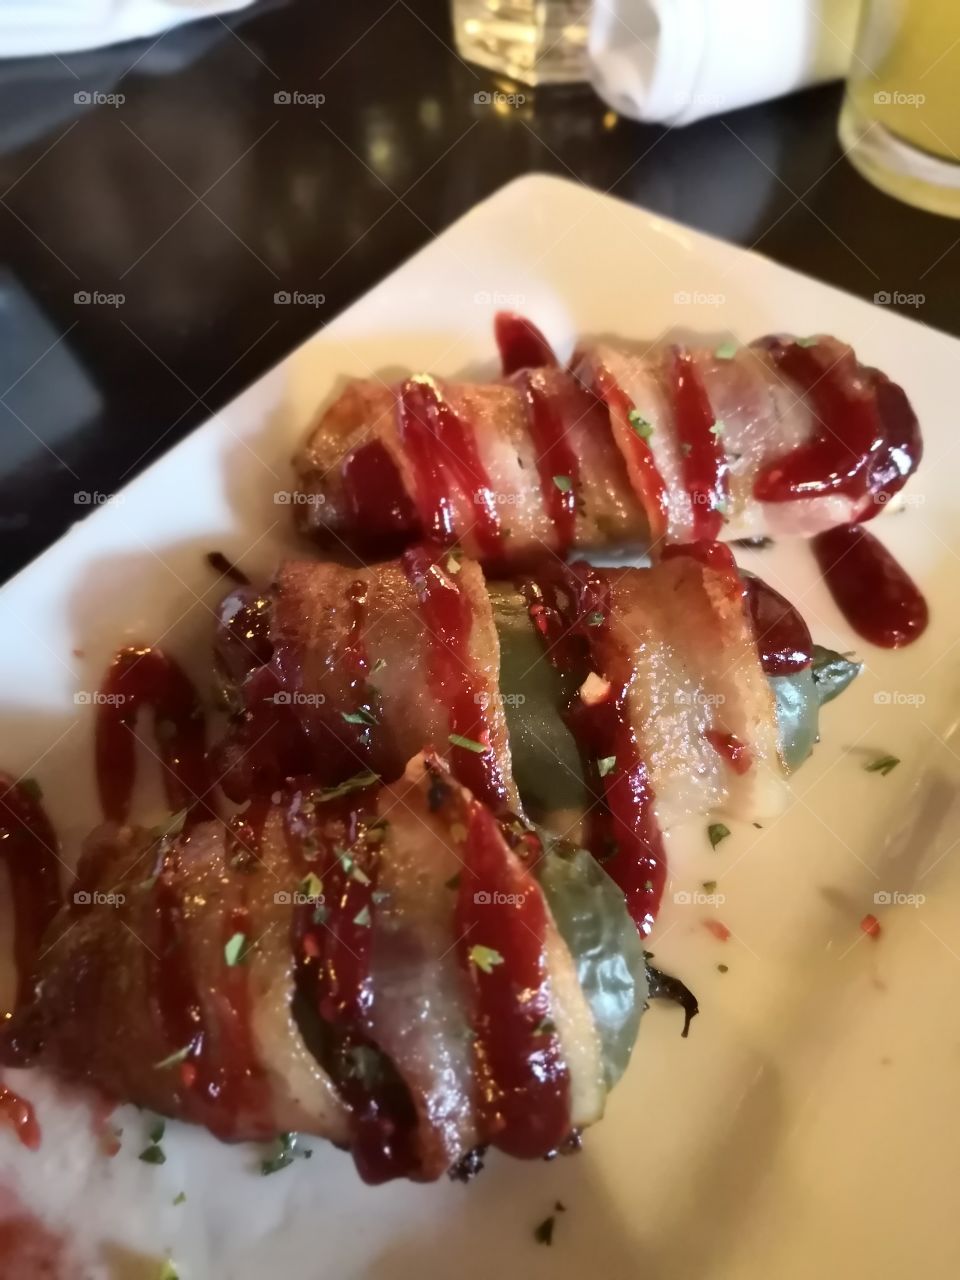 cream cheese filled Jalapeno wrapped in bacon!